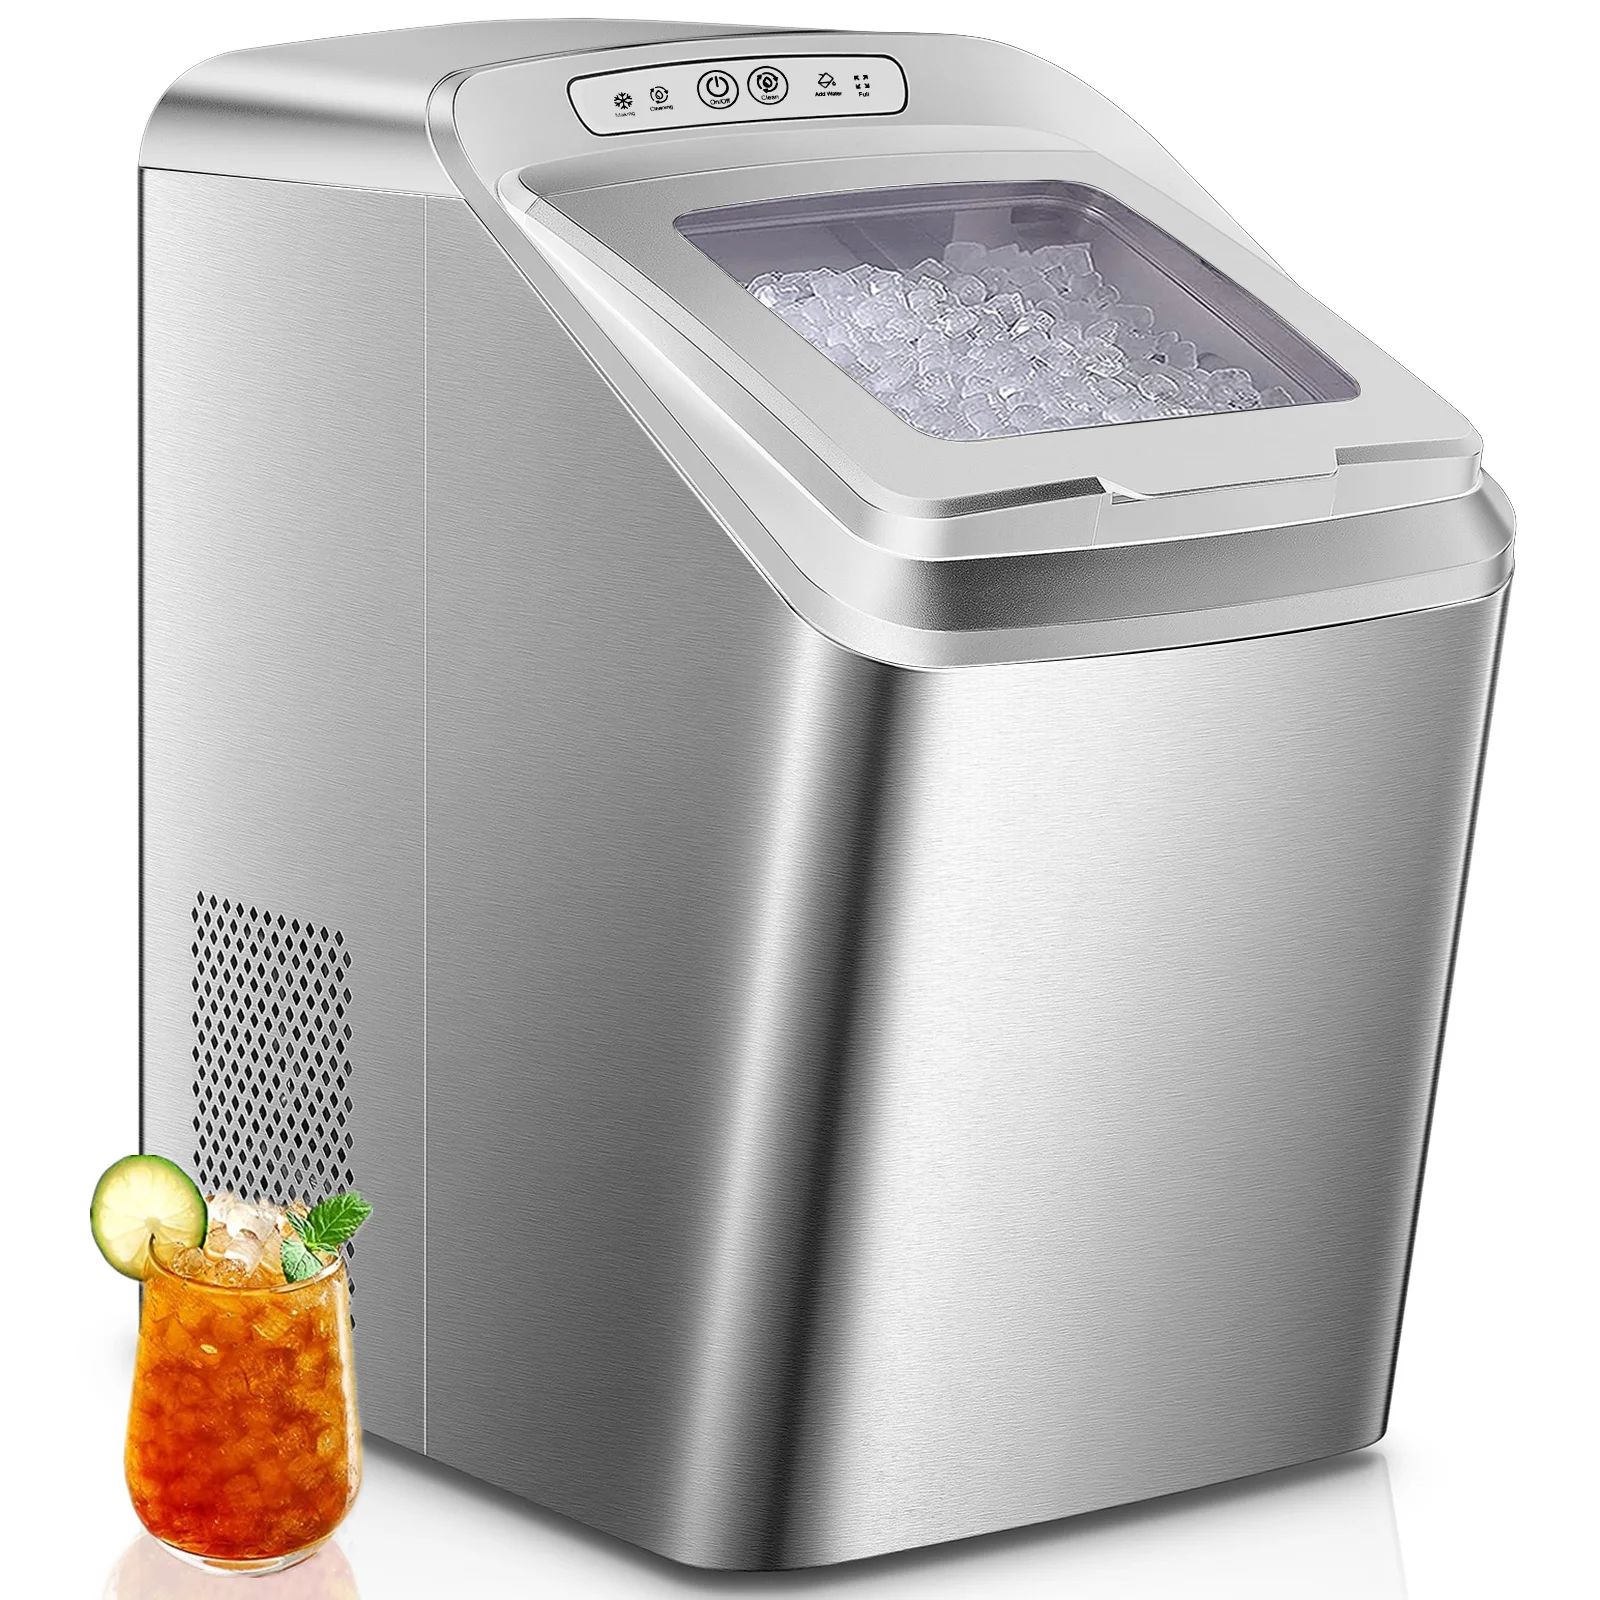 Nugget Ice Maker Countertop, 30Lb Pebble Pellet Ice per Day, Auto-Cleaning, Stainless Steel | Walmart (US)